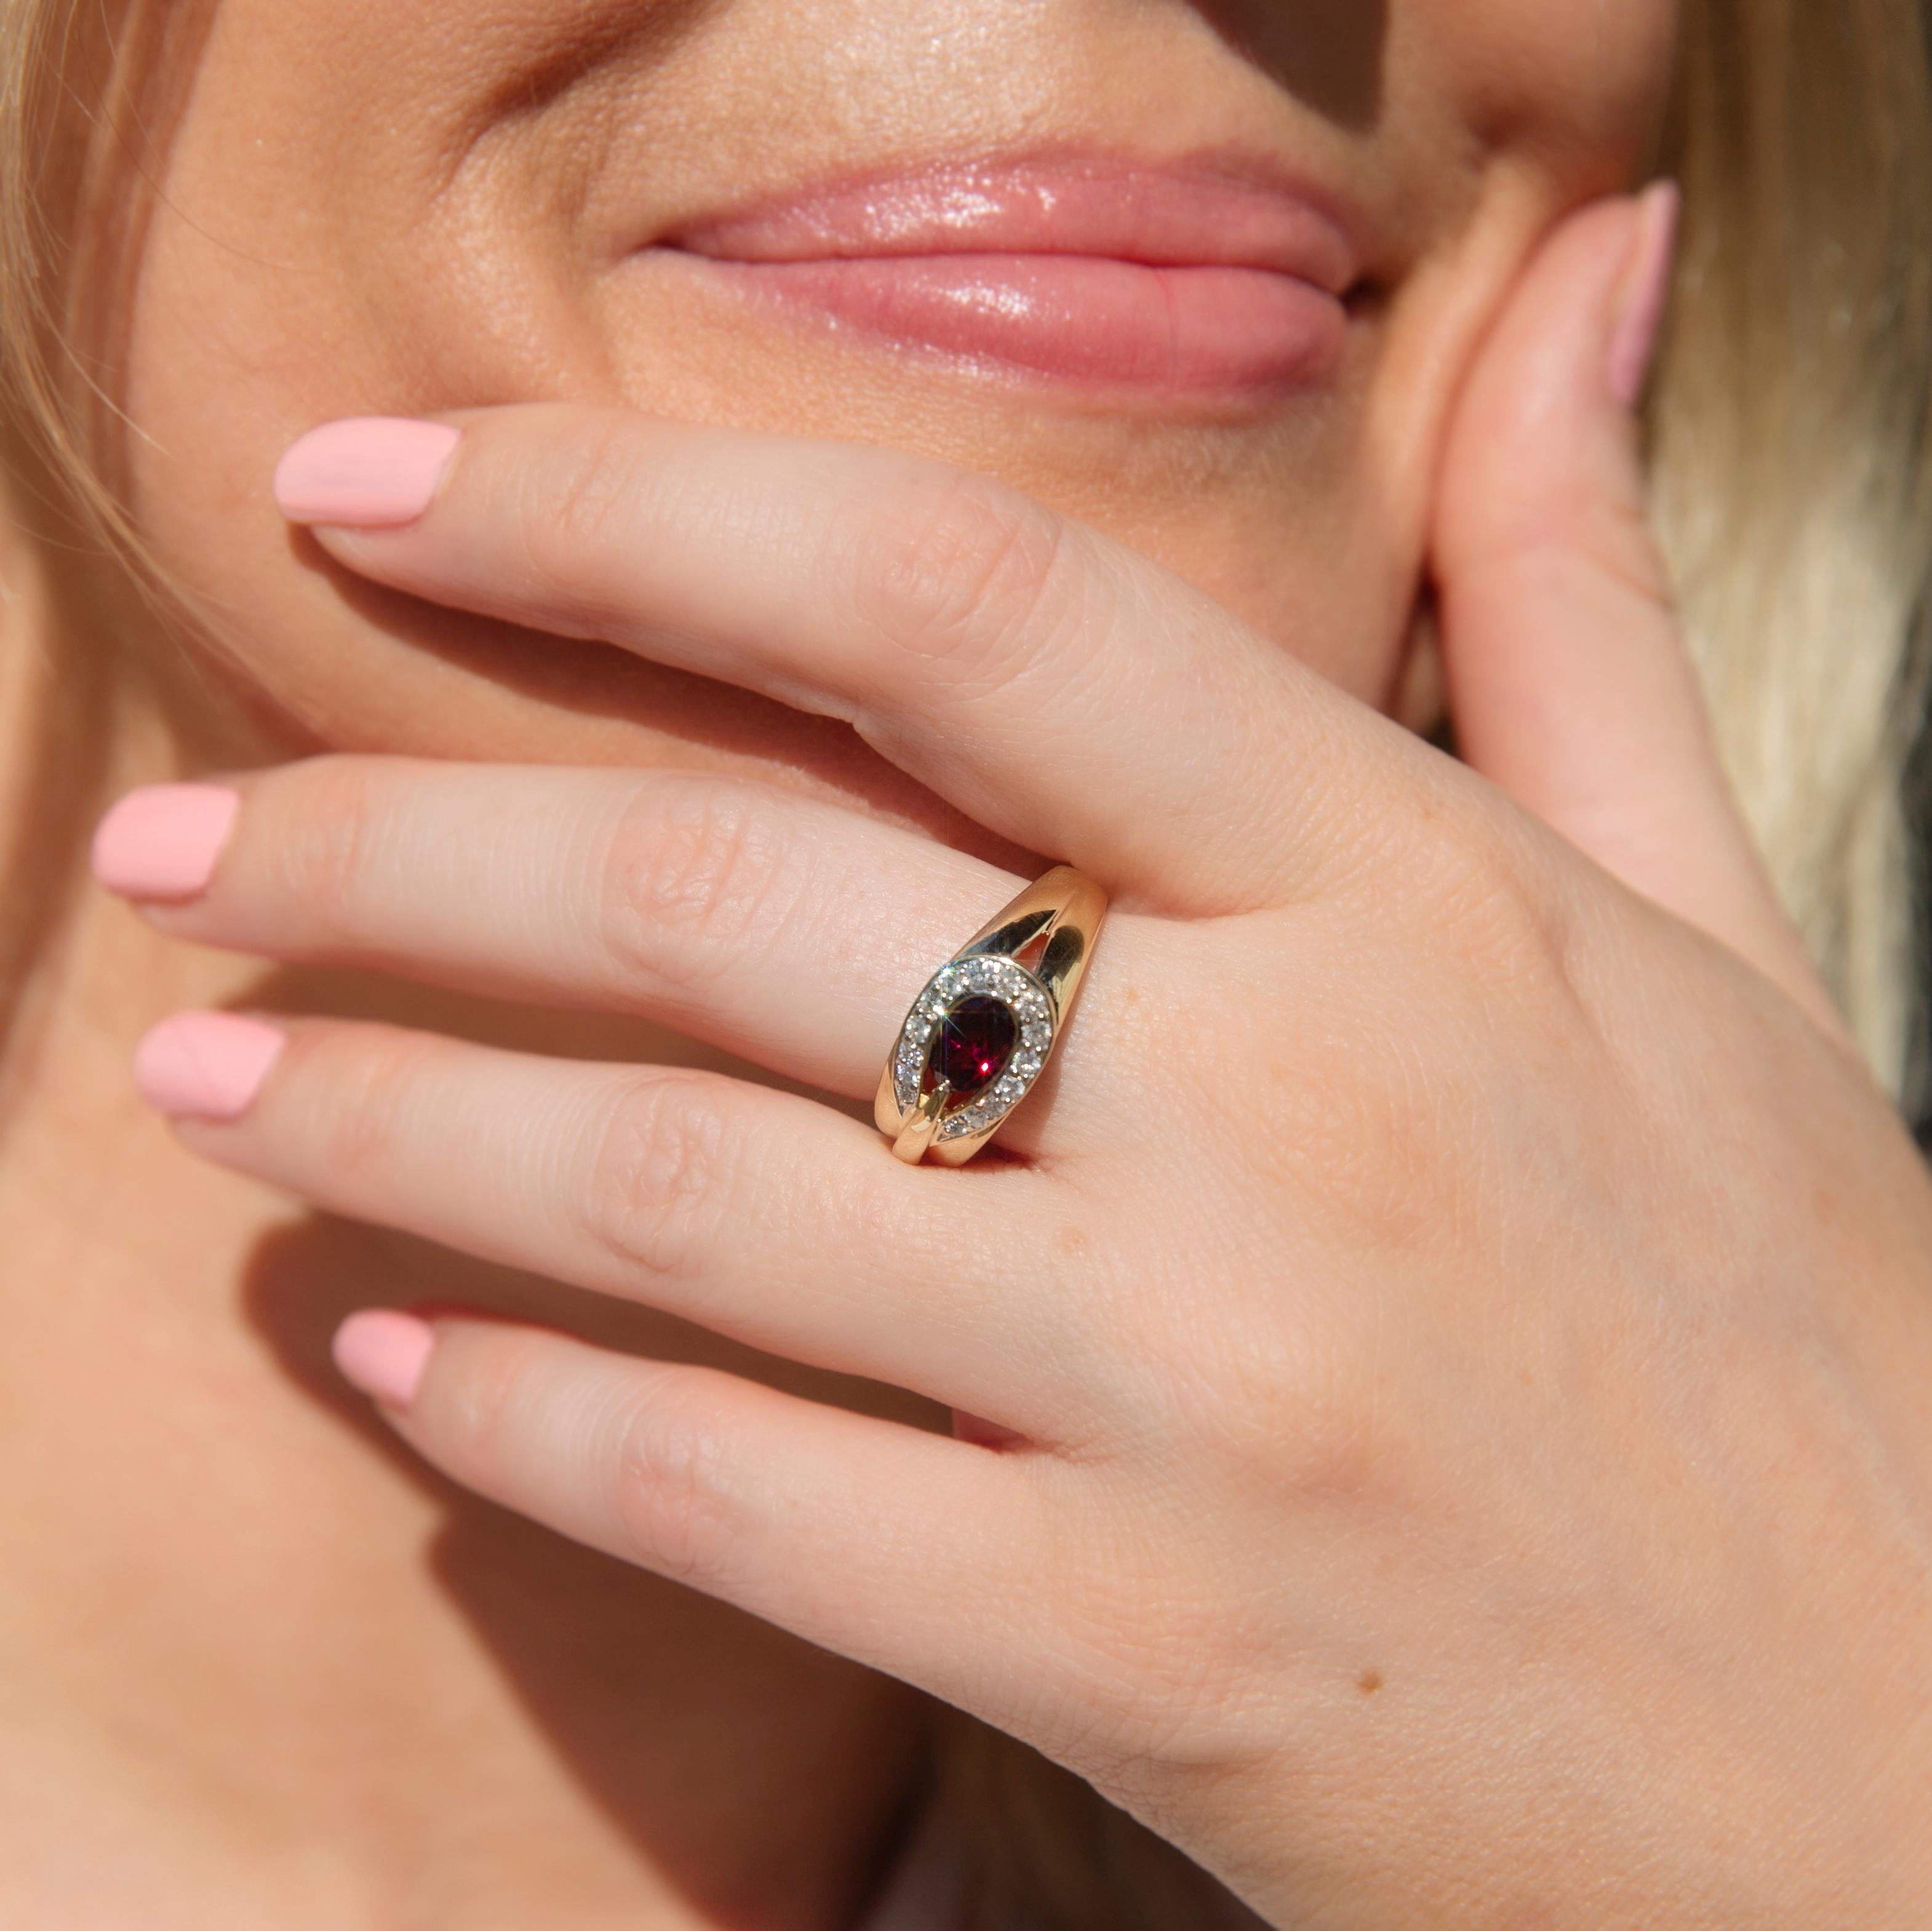 Beautifully crafted in 9 carat gold, The Ebbe Ring is a stunning piece. Her rich plum hued garnet sits embraced by shimmering diamonds in a horseshoe design. The perfect addition to any jewellery collection.

The Ebbe Ring Gem Details
The round